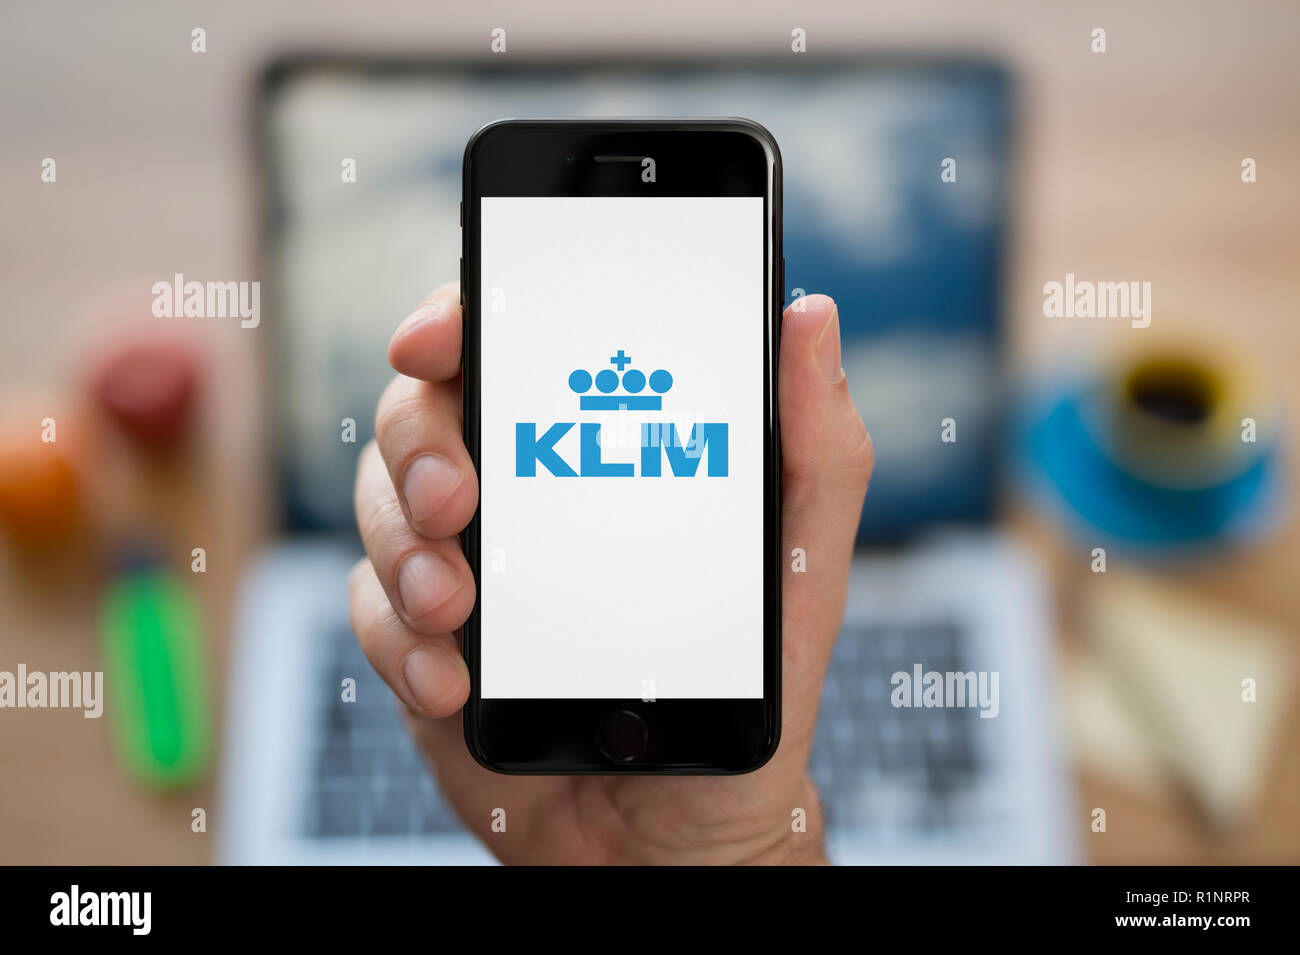 A man looks at his iPhone which displays the KLM logo, while sat at his computer desk (Editorial use only). Stock Photo